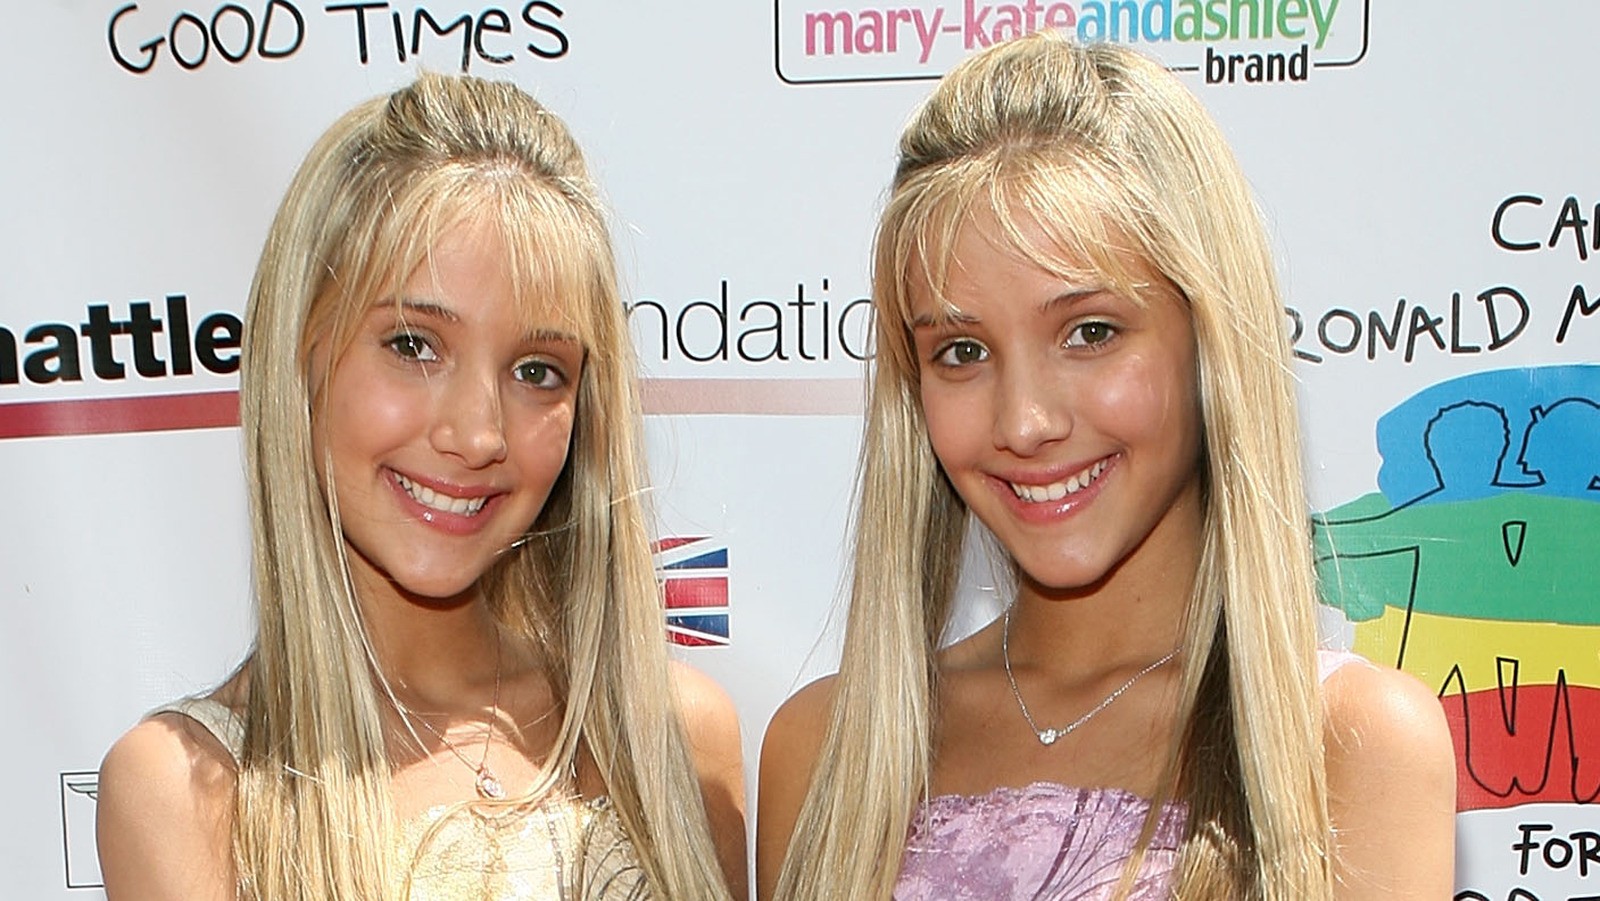 Top 15 Most Famous and Hottest Celebrity Twins in the World